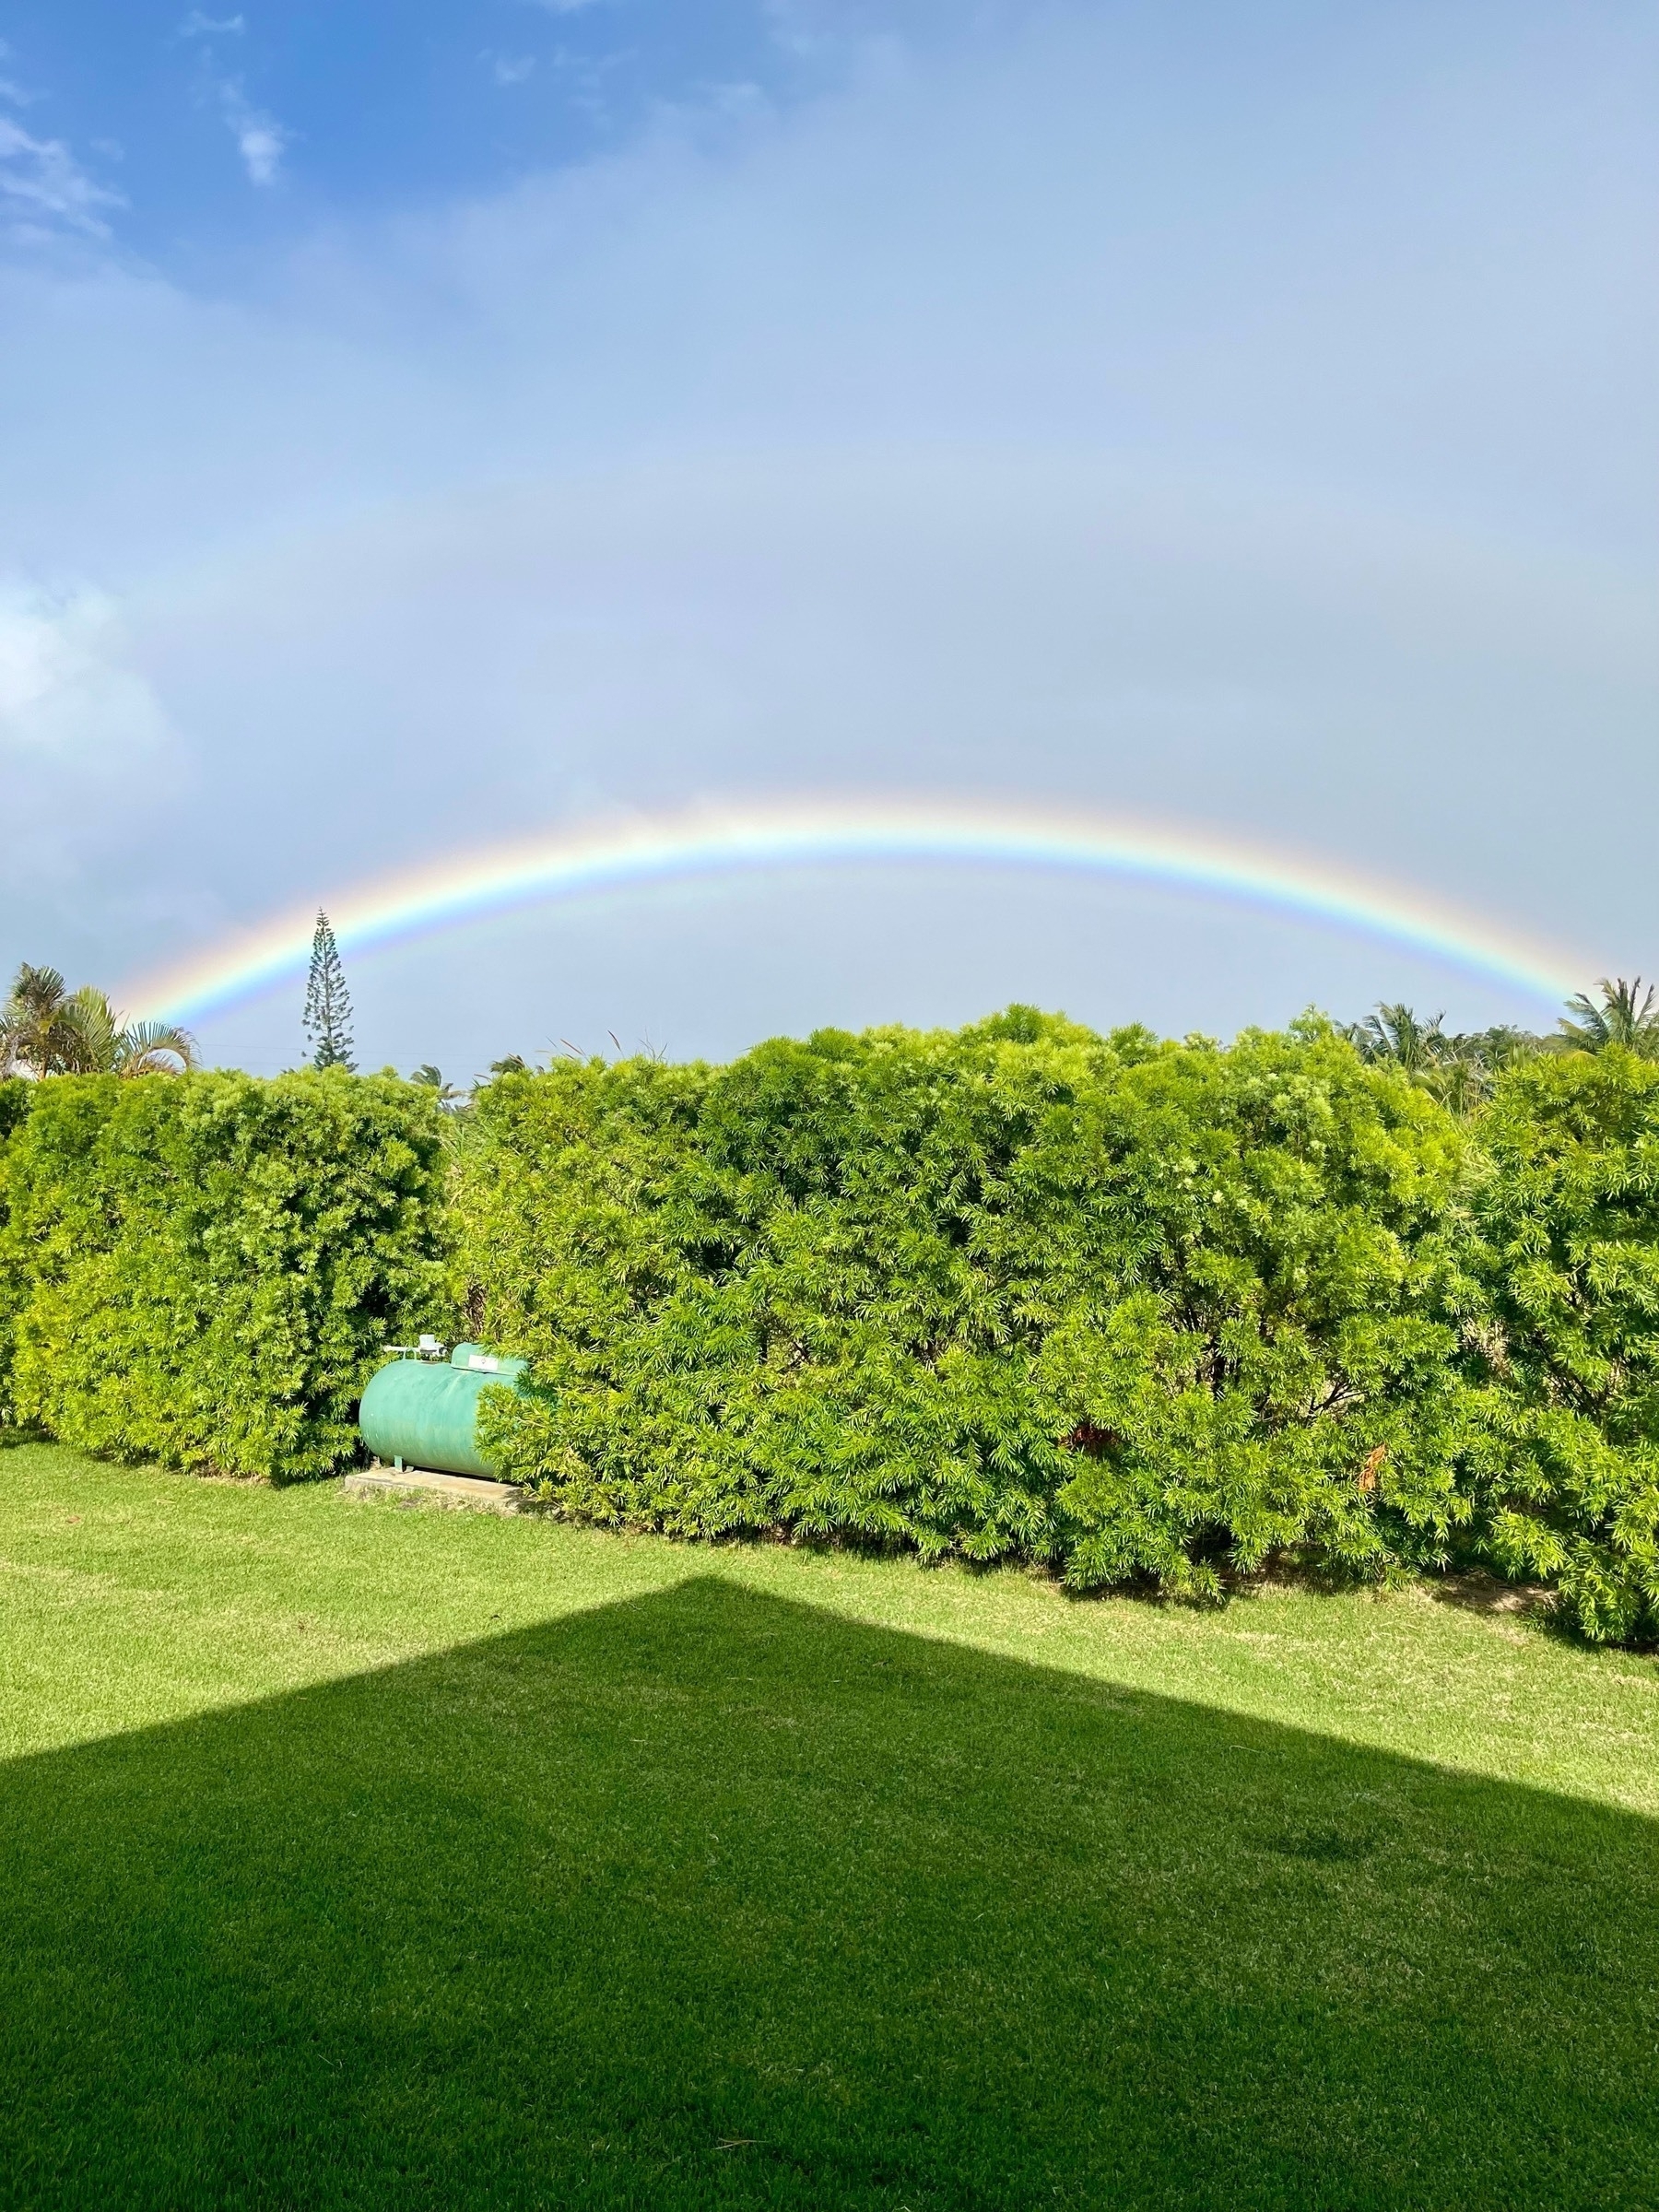 A rainbow over a hedge with a dark sky. A propane tank is in the middle of the hedge. A lawn in the foreground has the shadow of a roof on it.